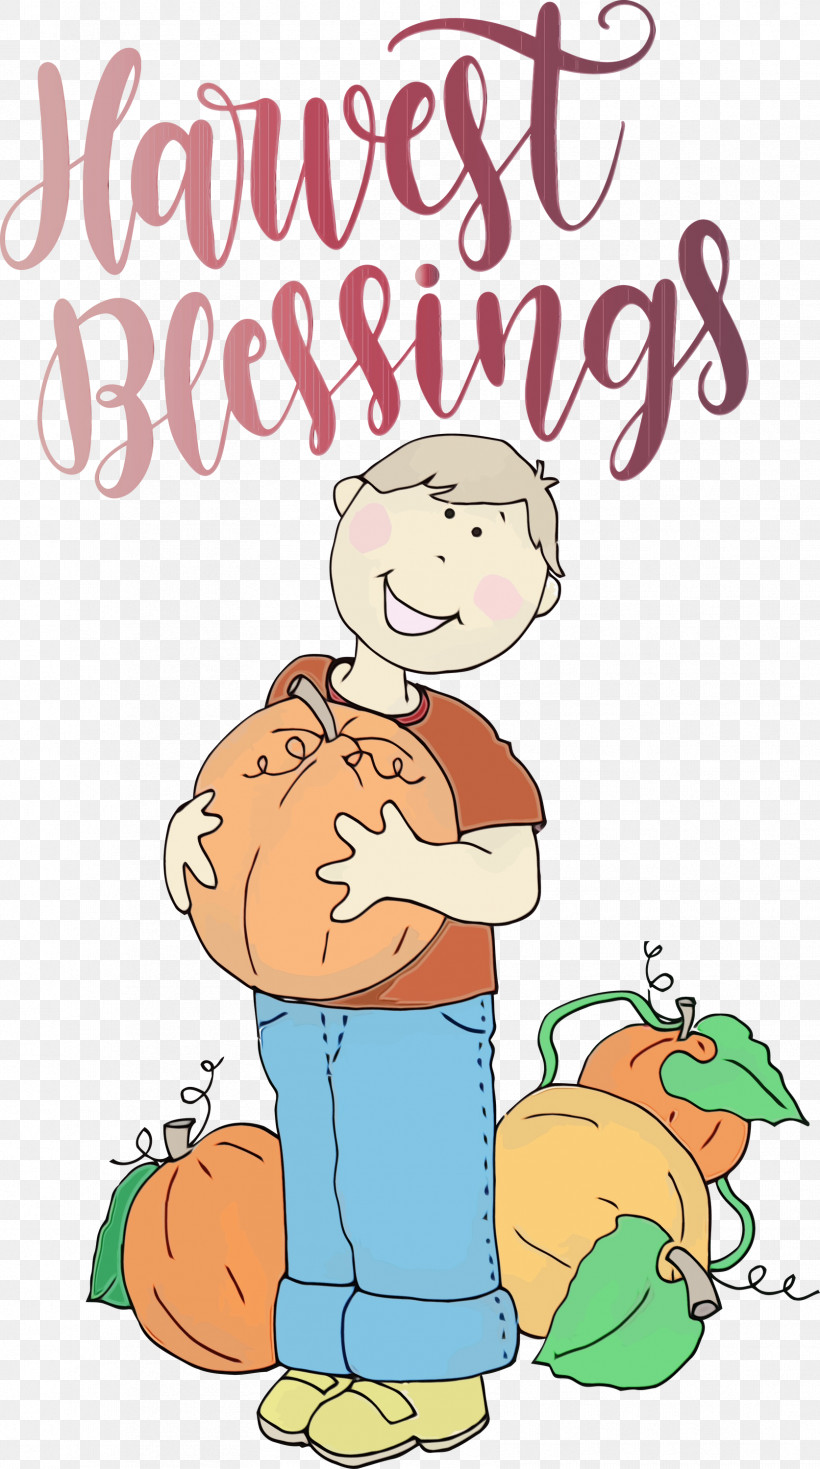 Cartoon Happiness Text, PNG, 1673x2999px, Harvest Blessings, Autumn, Cartoon, Happiness, Paint Download Free